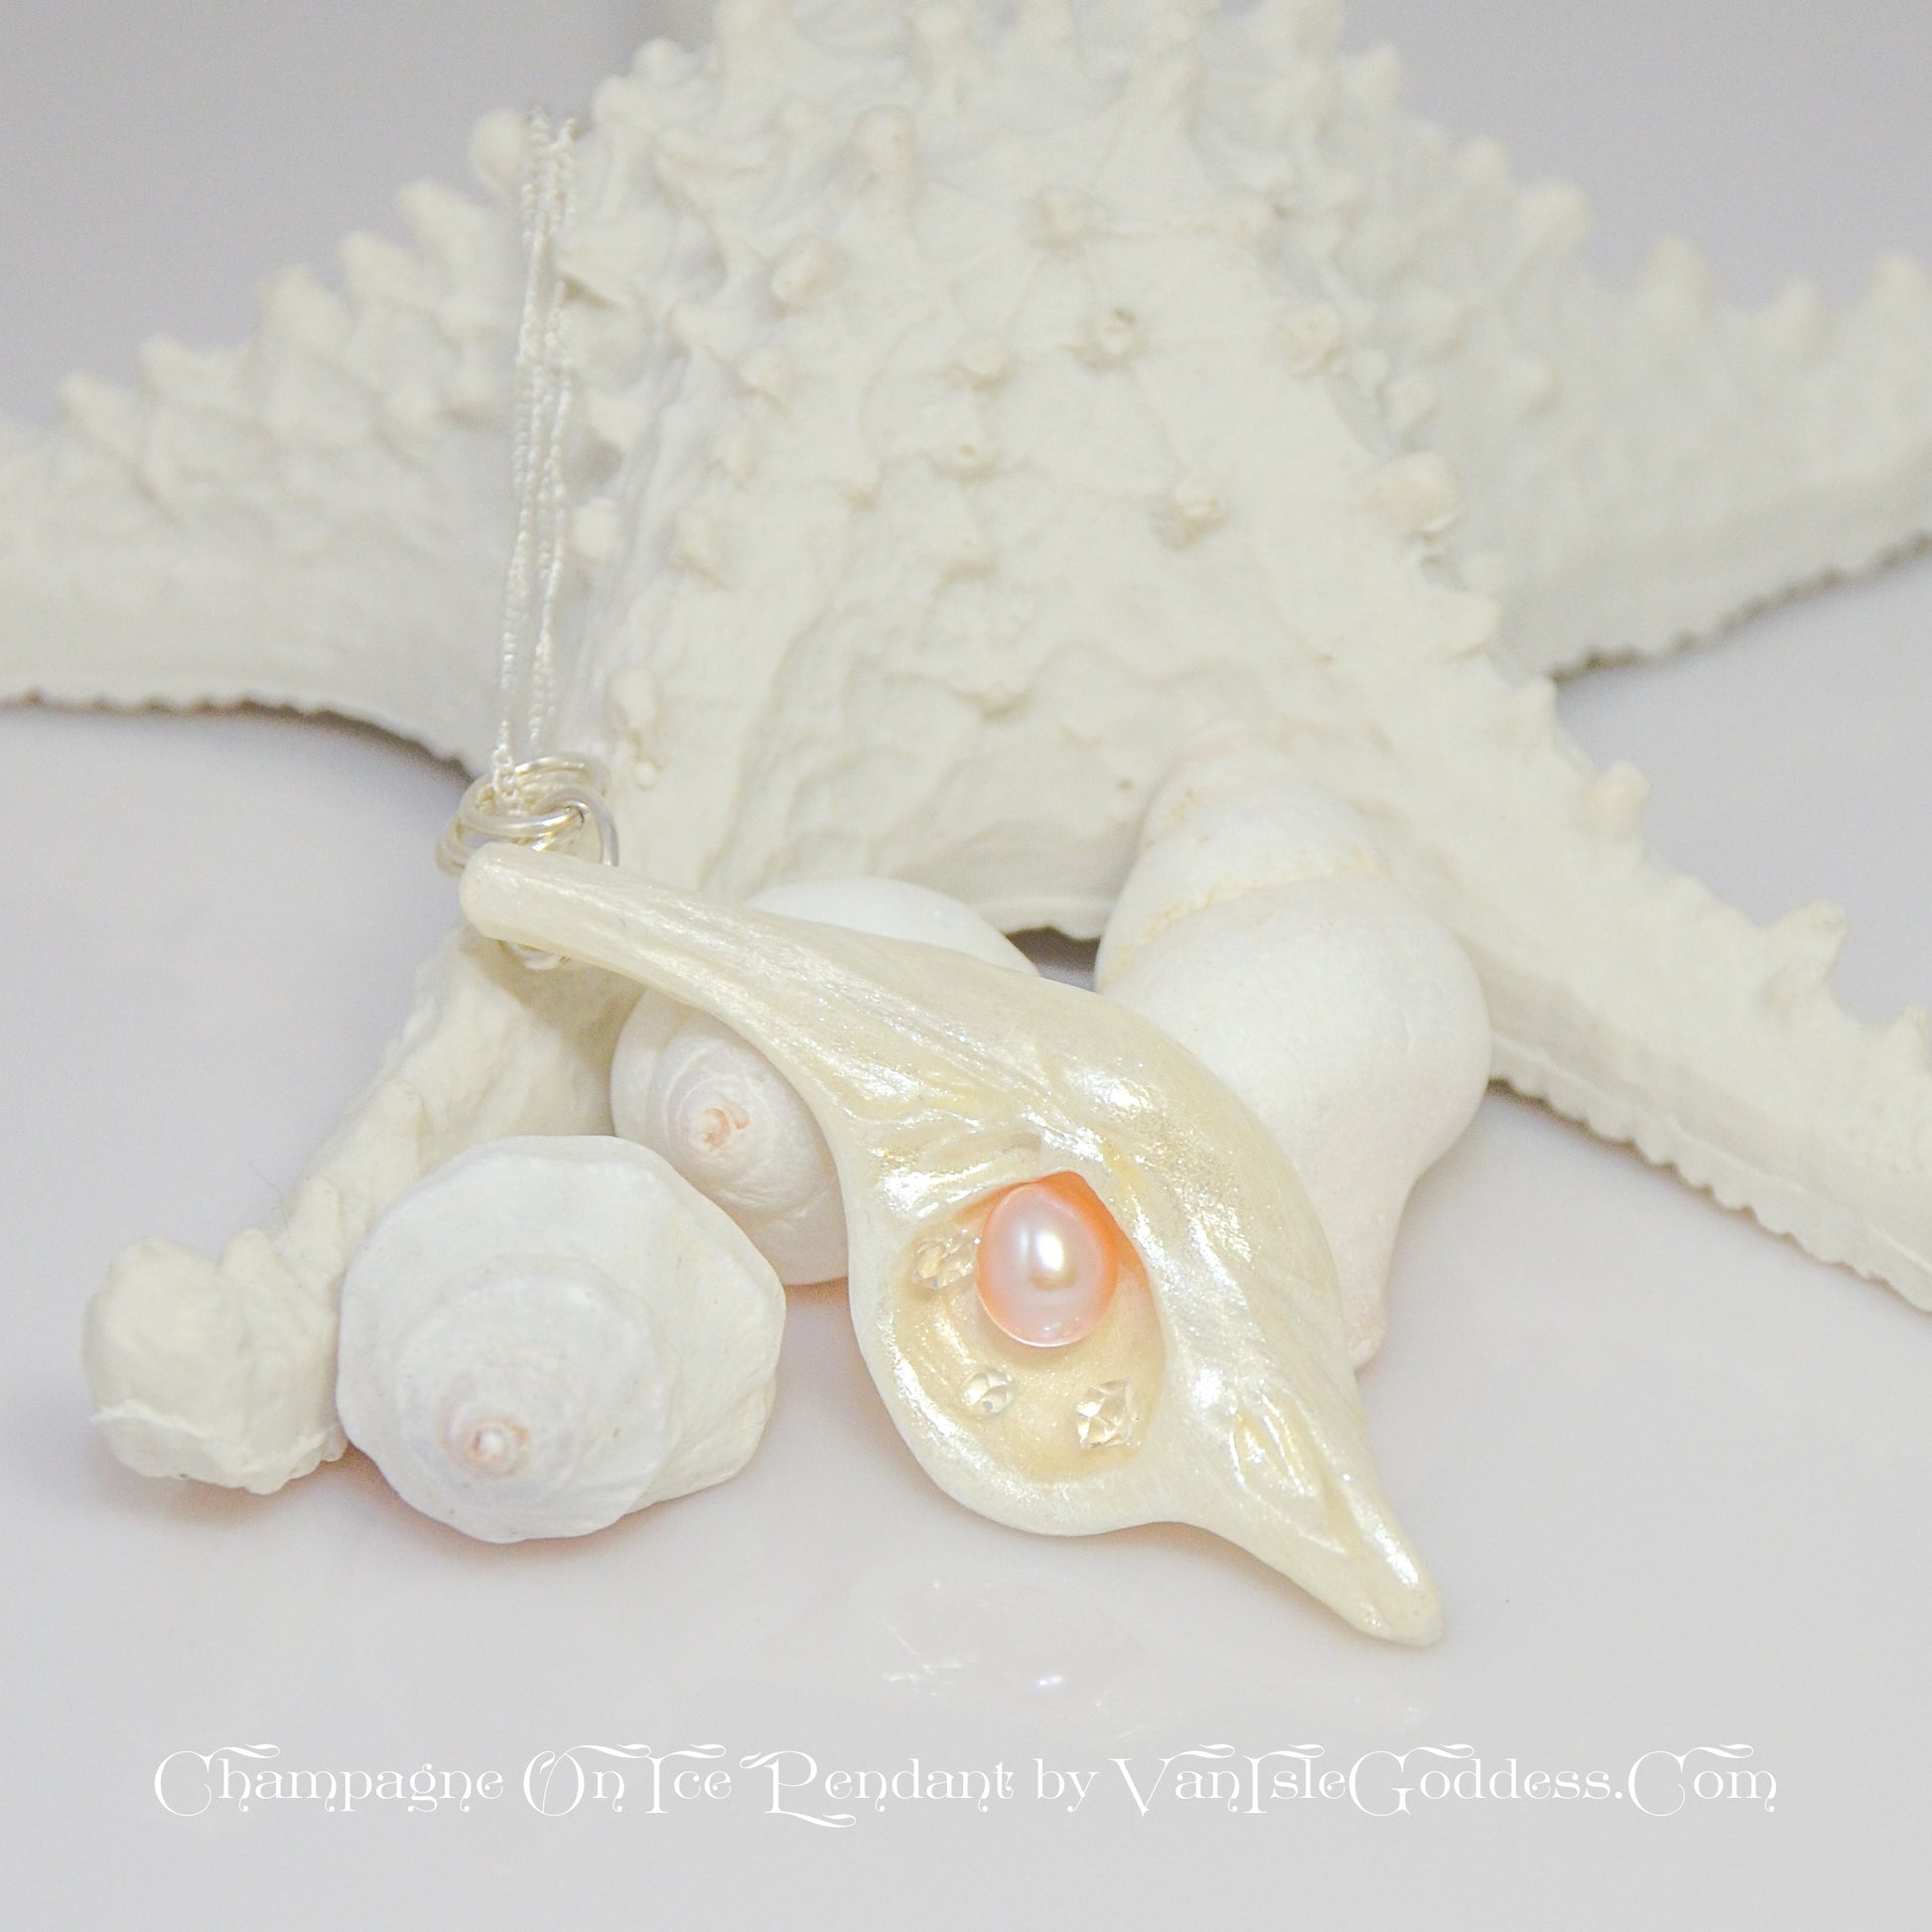 The pendant Champagne on Ice by Van Isle Goddess dot com is shown propped up against a few shells and a starfish.  